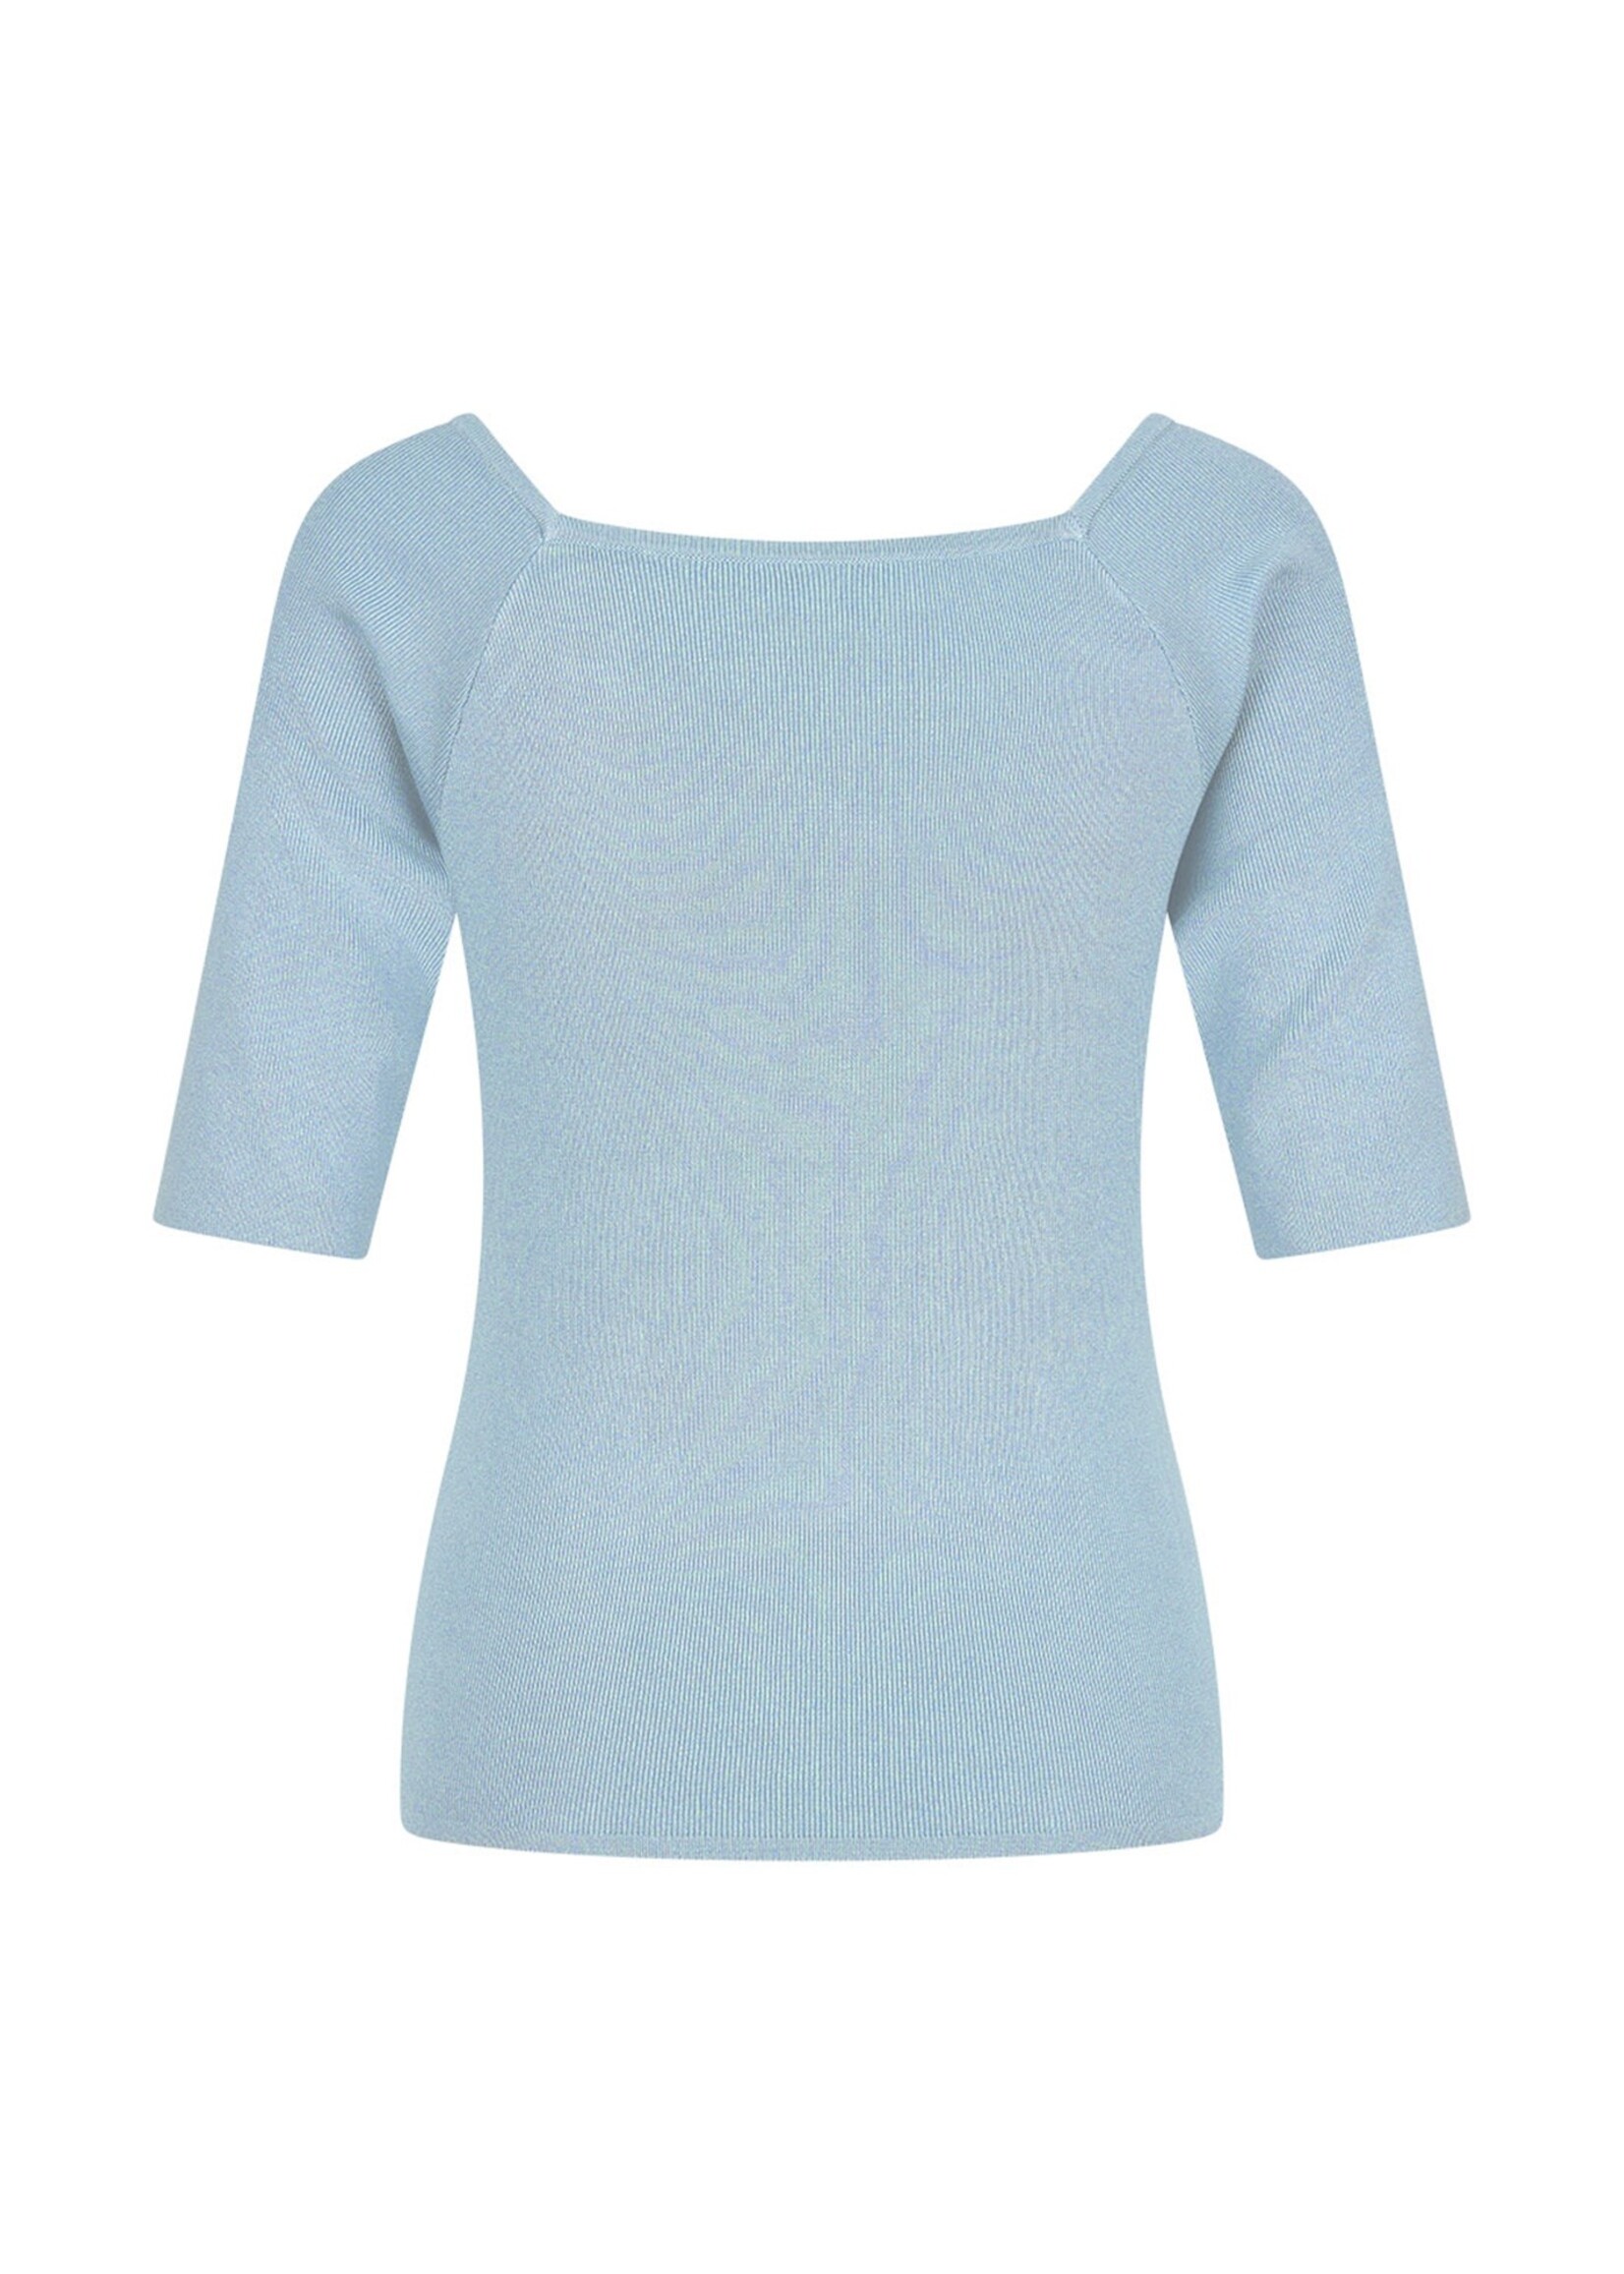 ZILCH ZILCH TOP SQUARE NECK 41BAS10.180